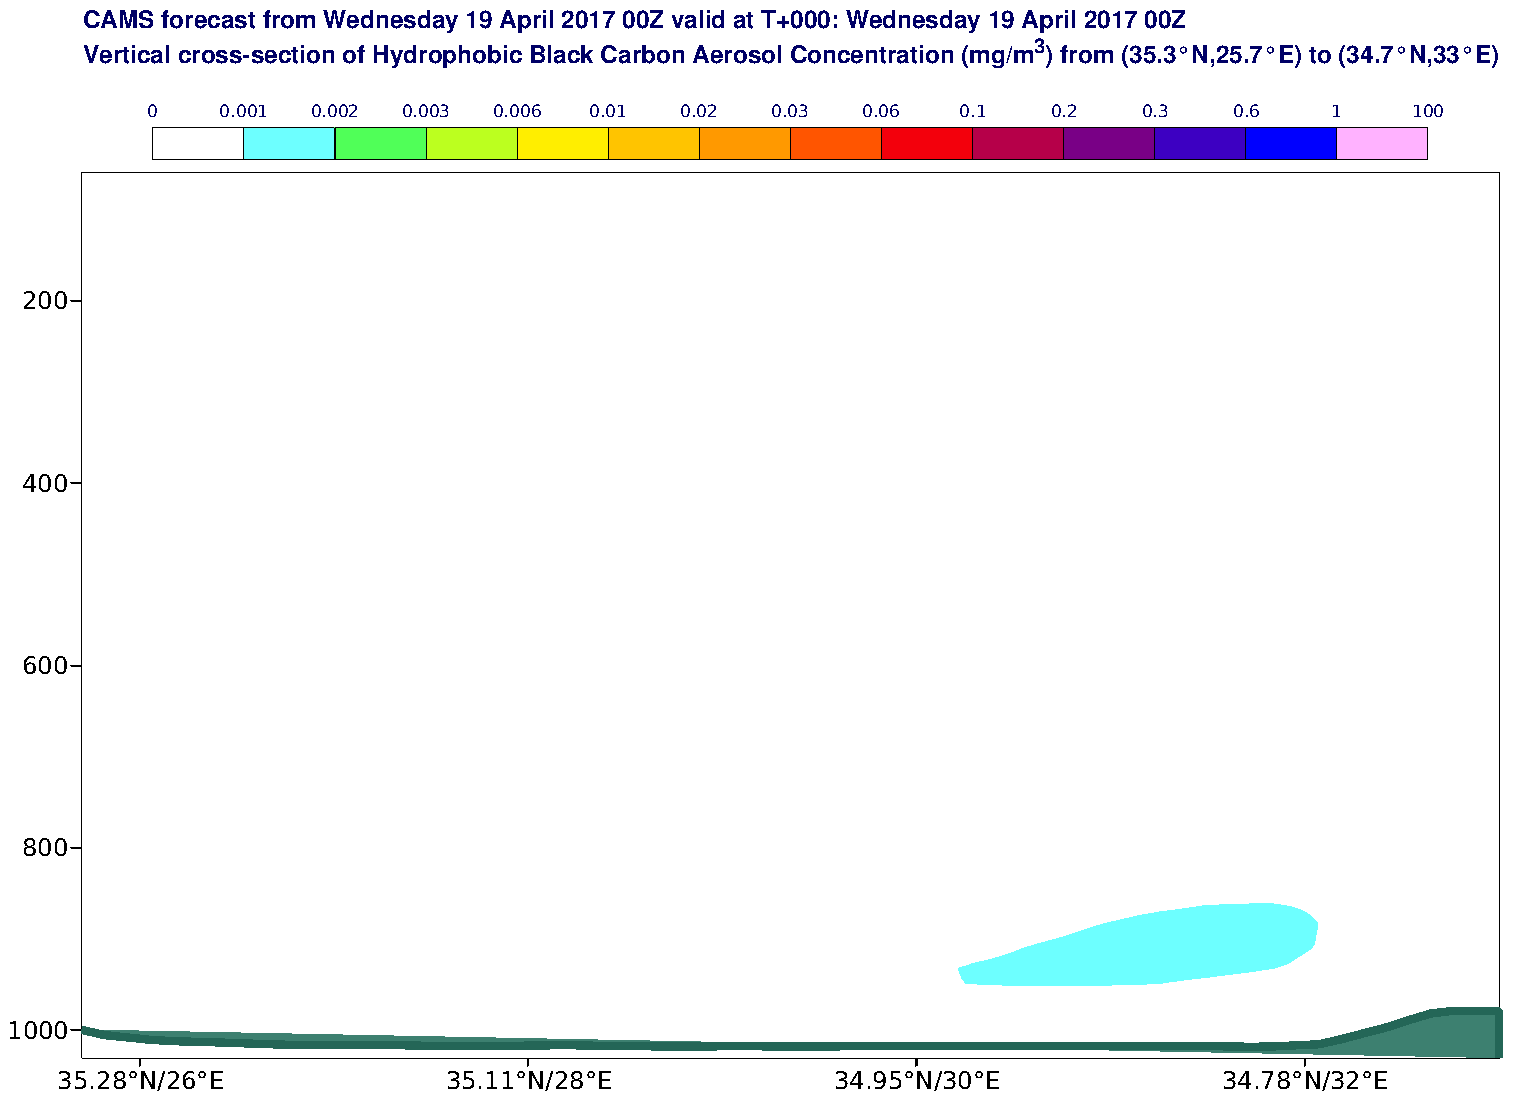 Vertical cross-section of Hydrophobic Black Carbon Aerosol Concentration (mg/m3) valid at T0 - 2017-04-19 00:00